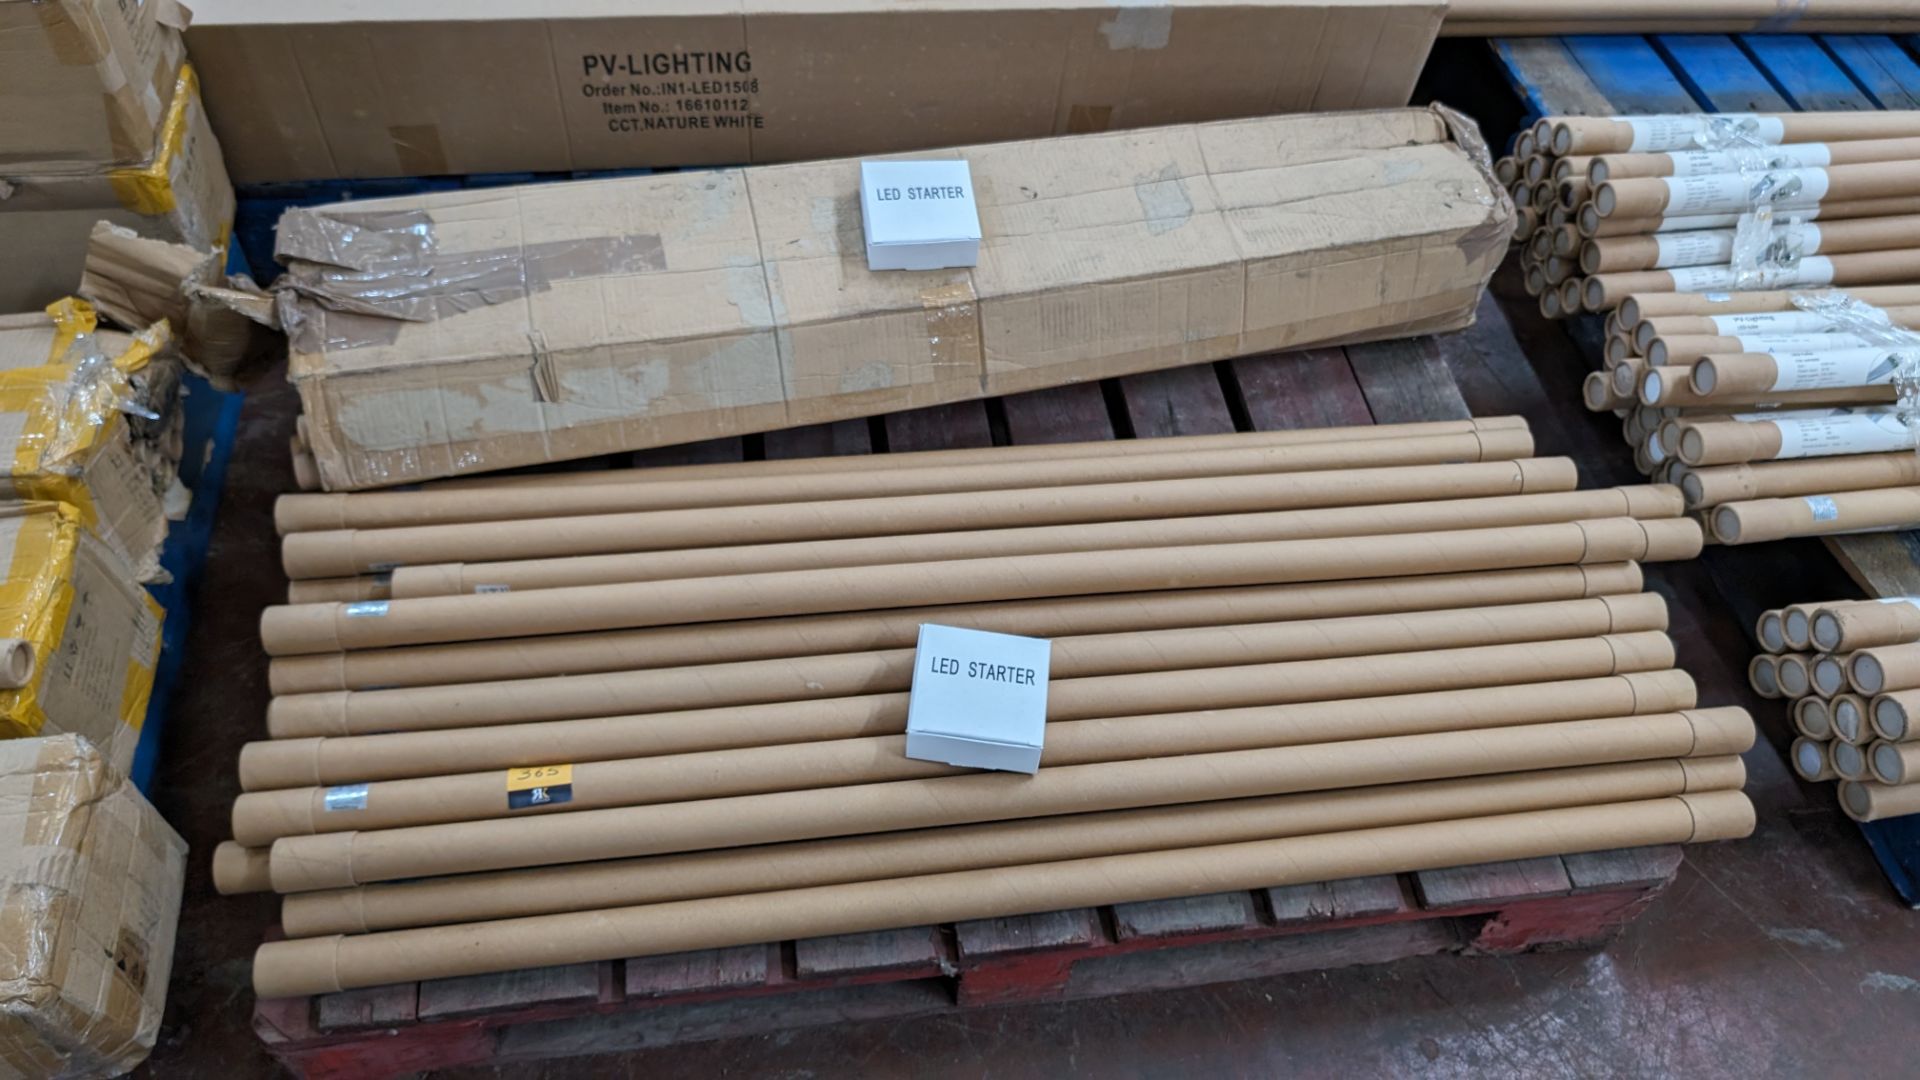 The contents of a pallet of T8 1200mm 20w 2000 lumens LED lighting tubes, approximately 44 pieces in